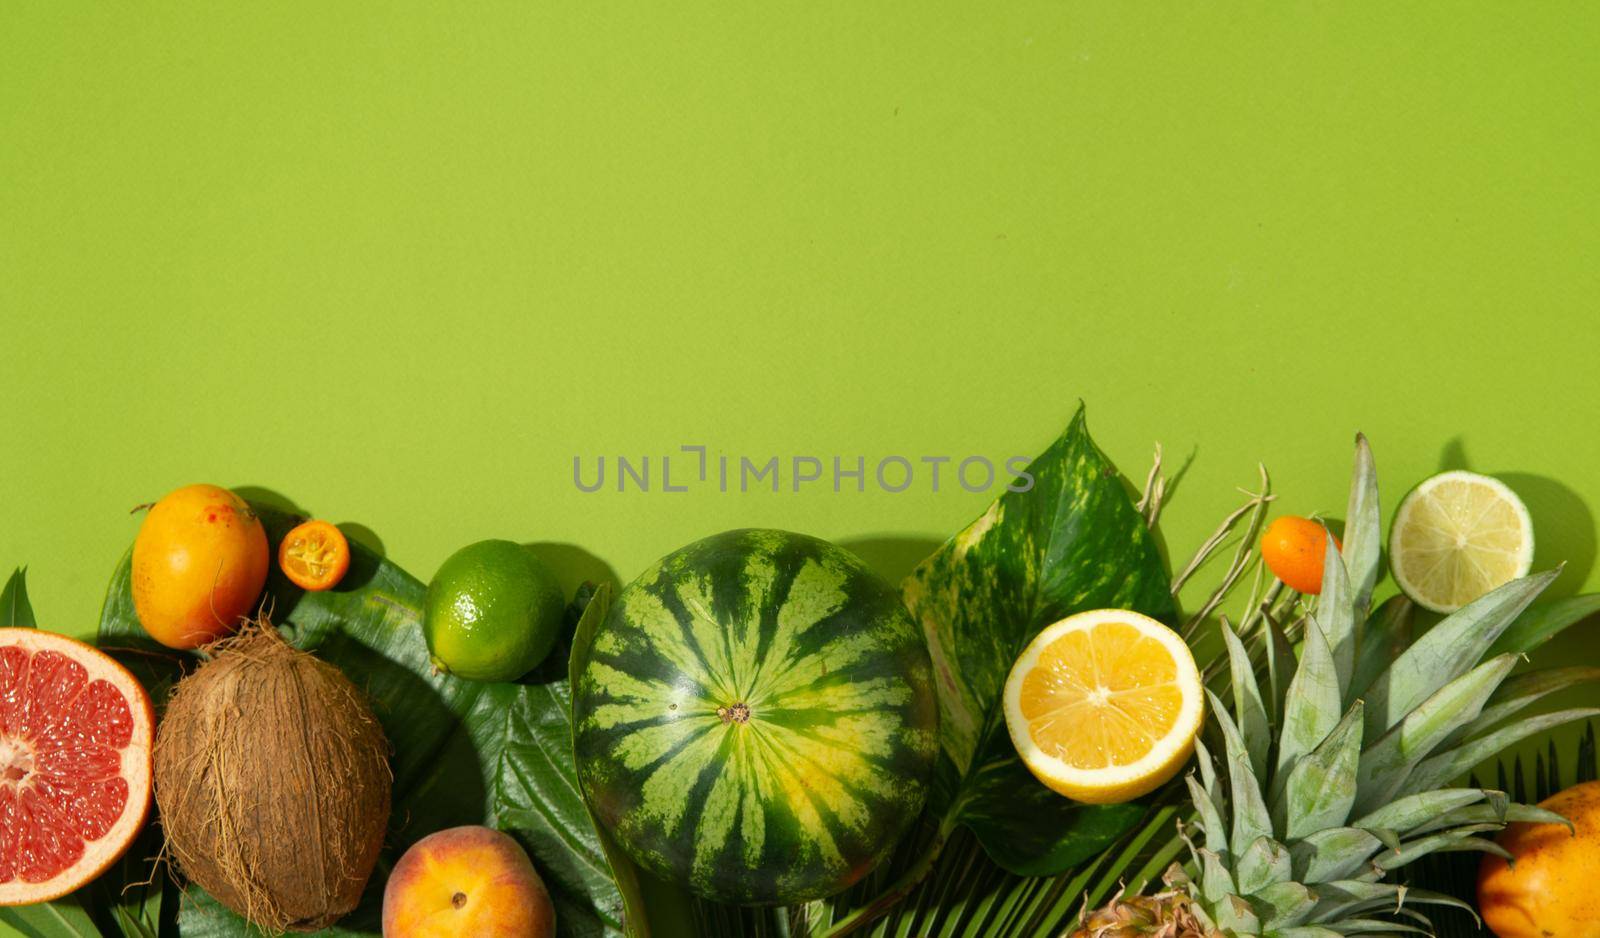 tropical fruits layout with copy space. High quality photo